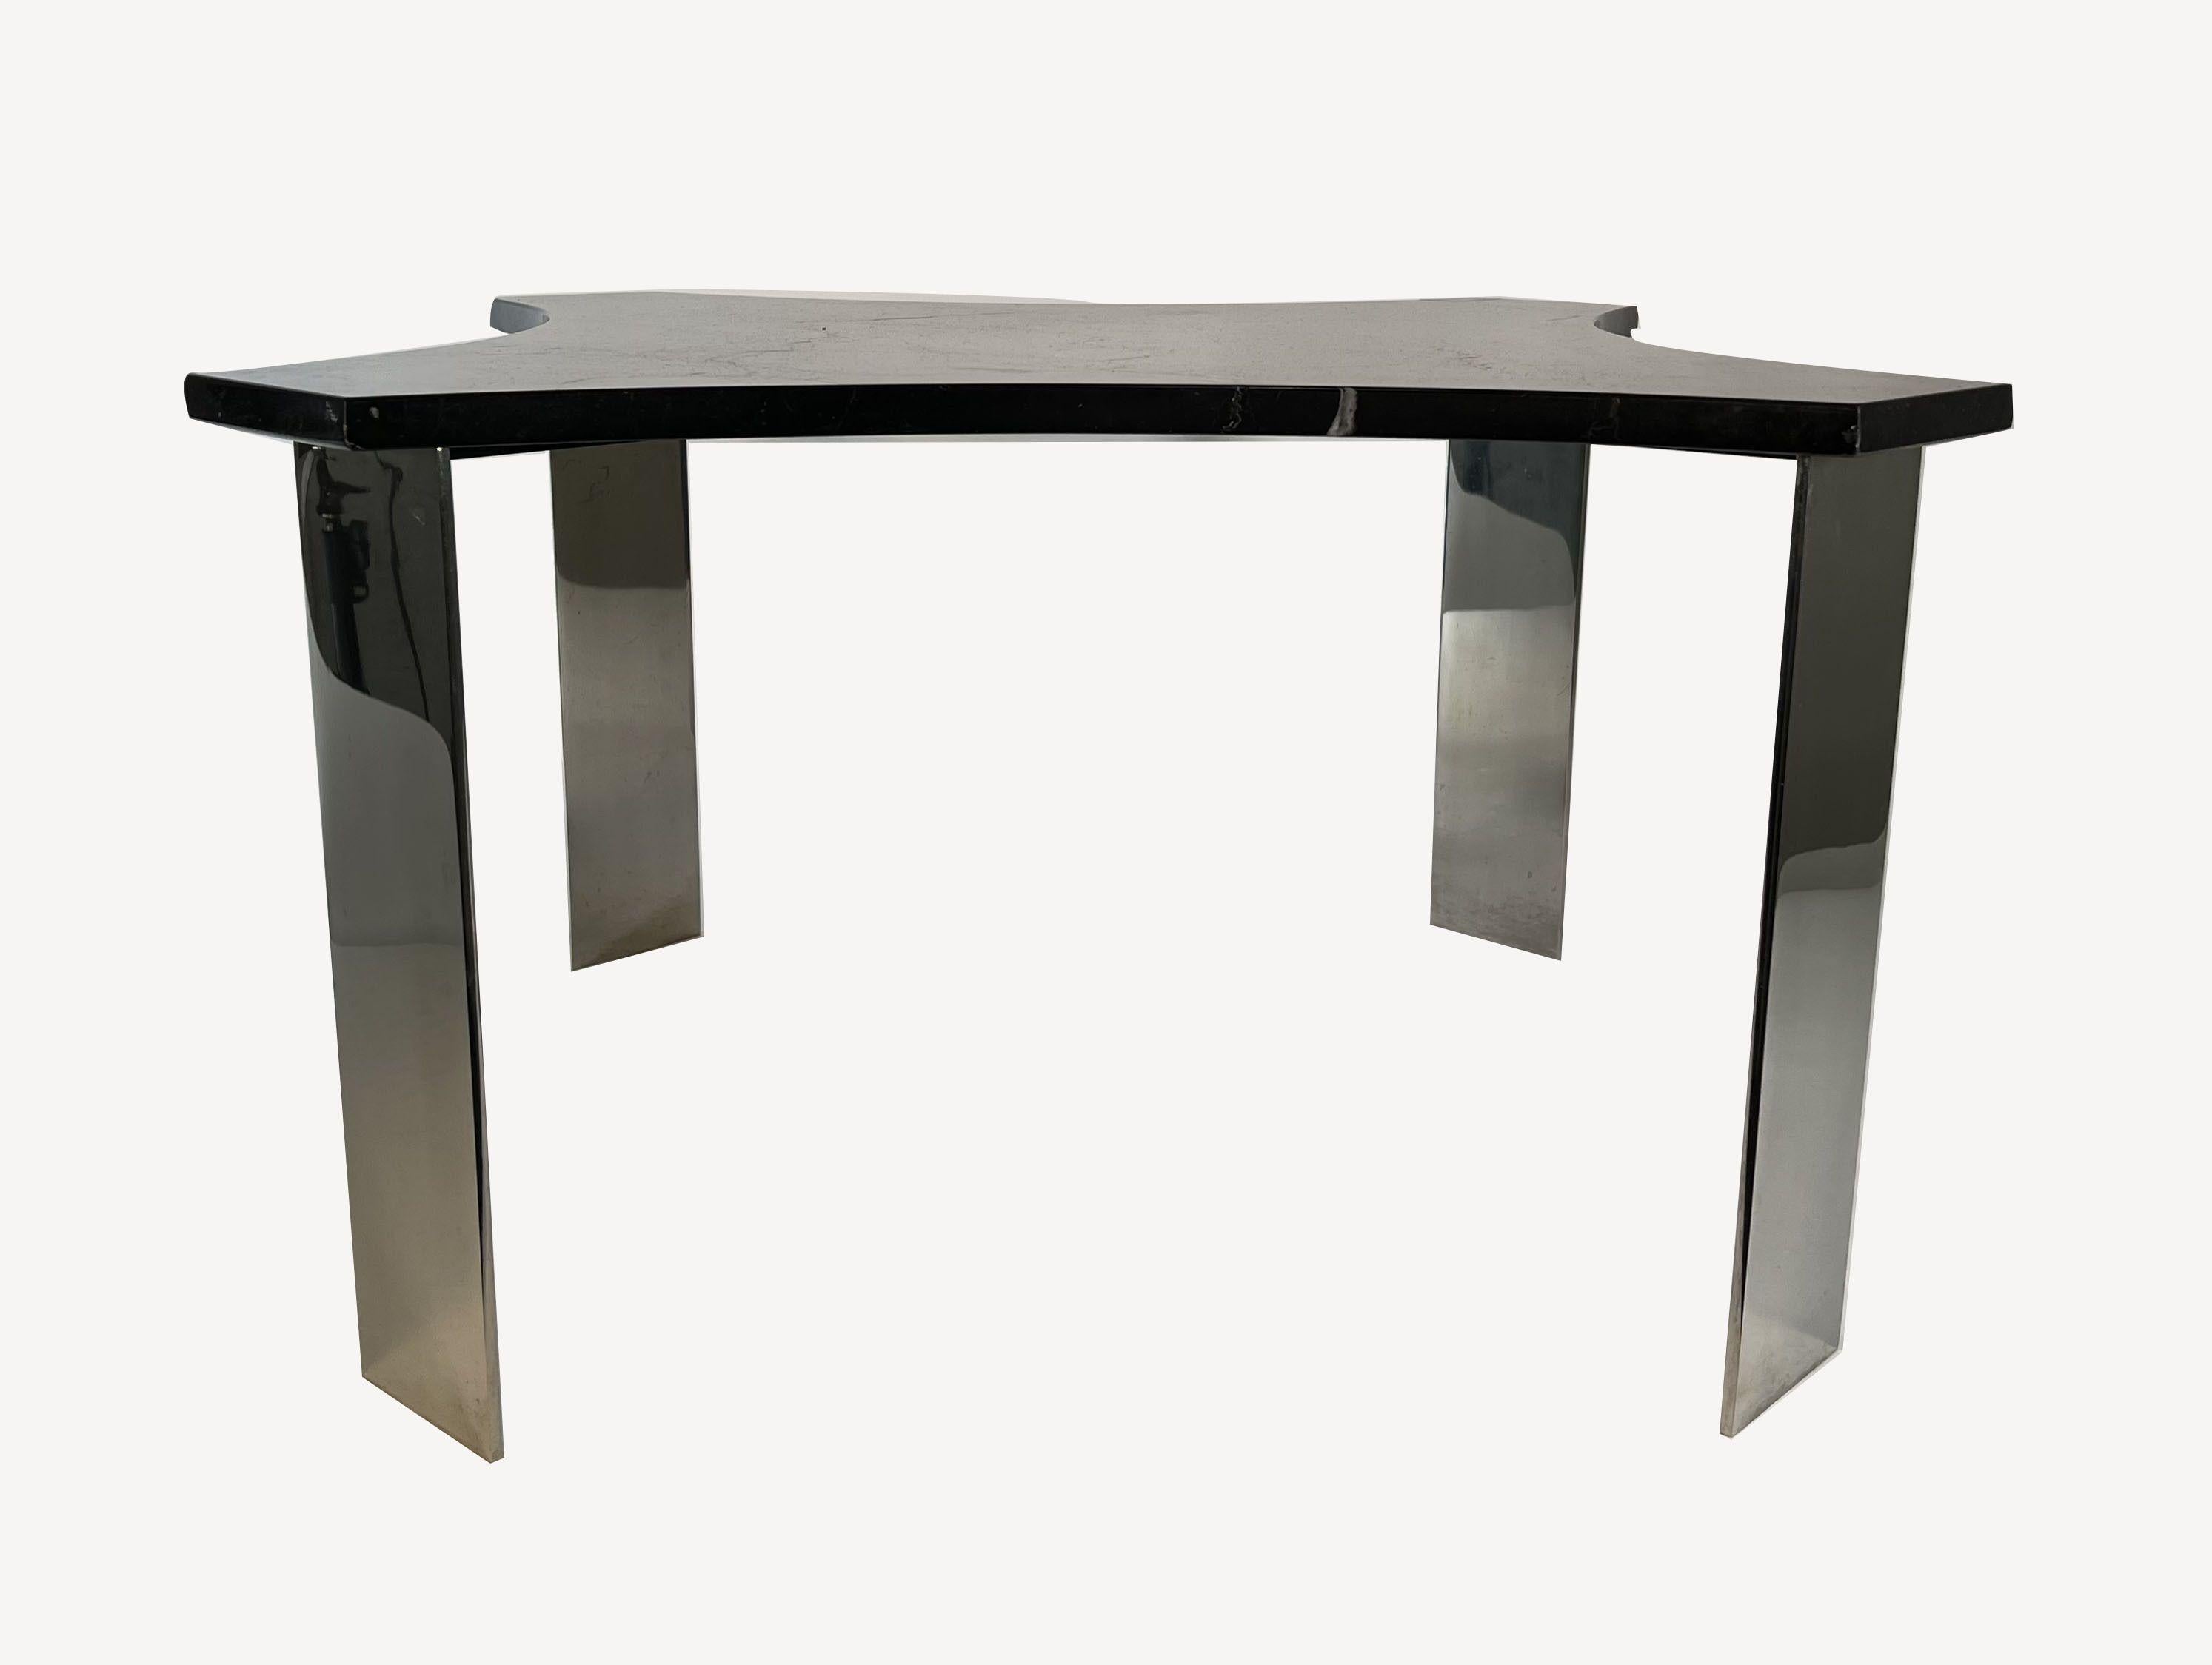 Pair American Modern Polished Steel and Granite Tables, Pace Collection In Good Condition For Sale In Hollywood, FL